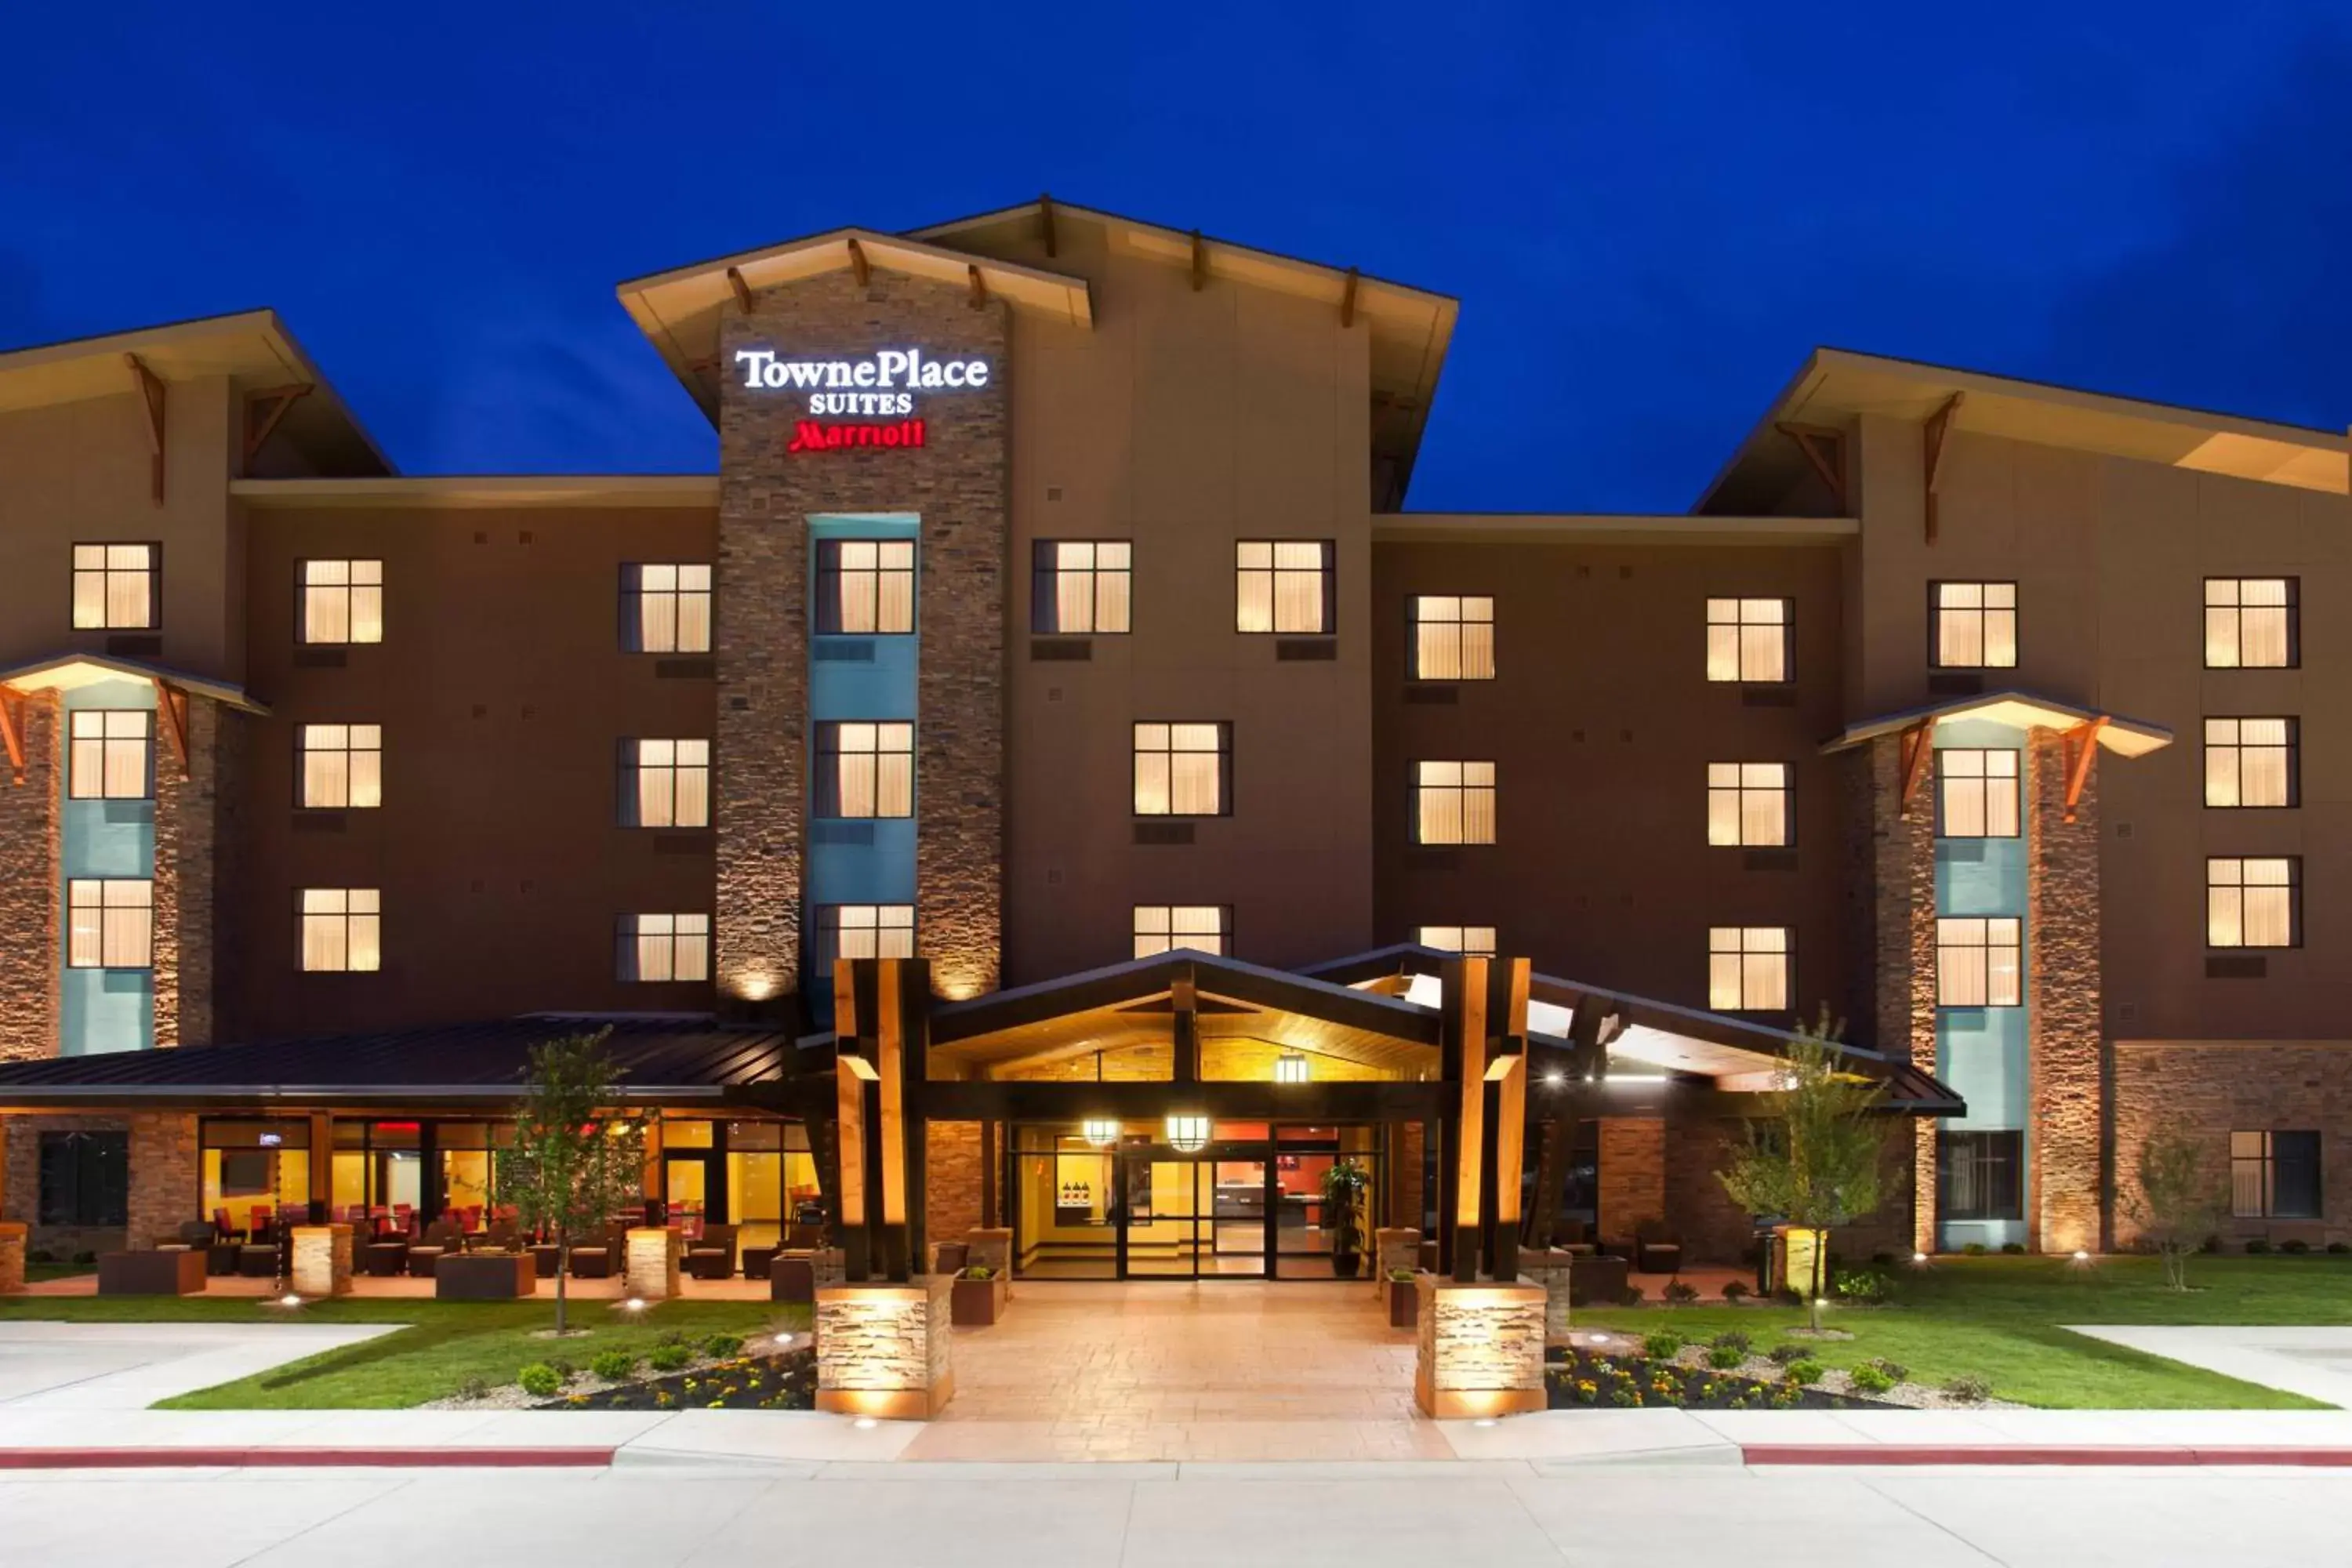 Property Building in TownePlace Suites by Marriott Carlsbad